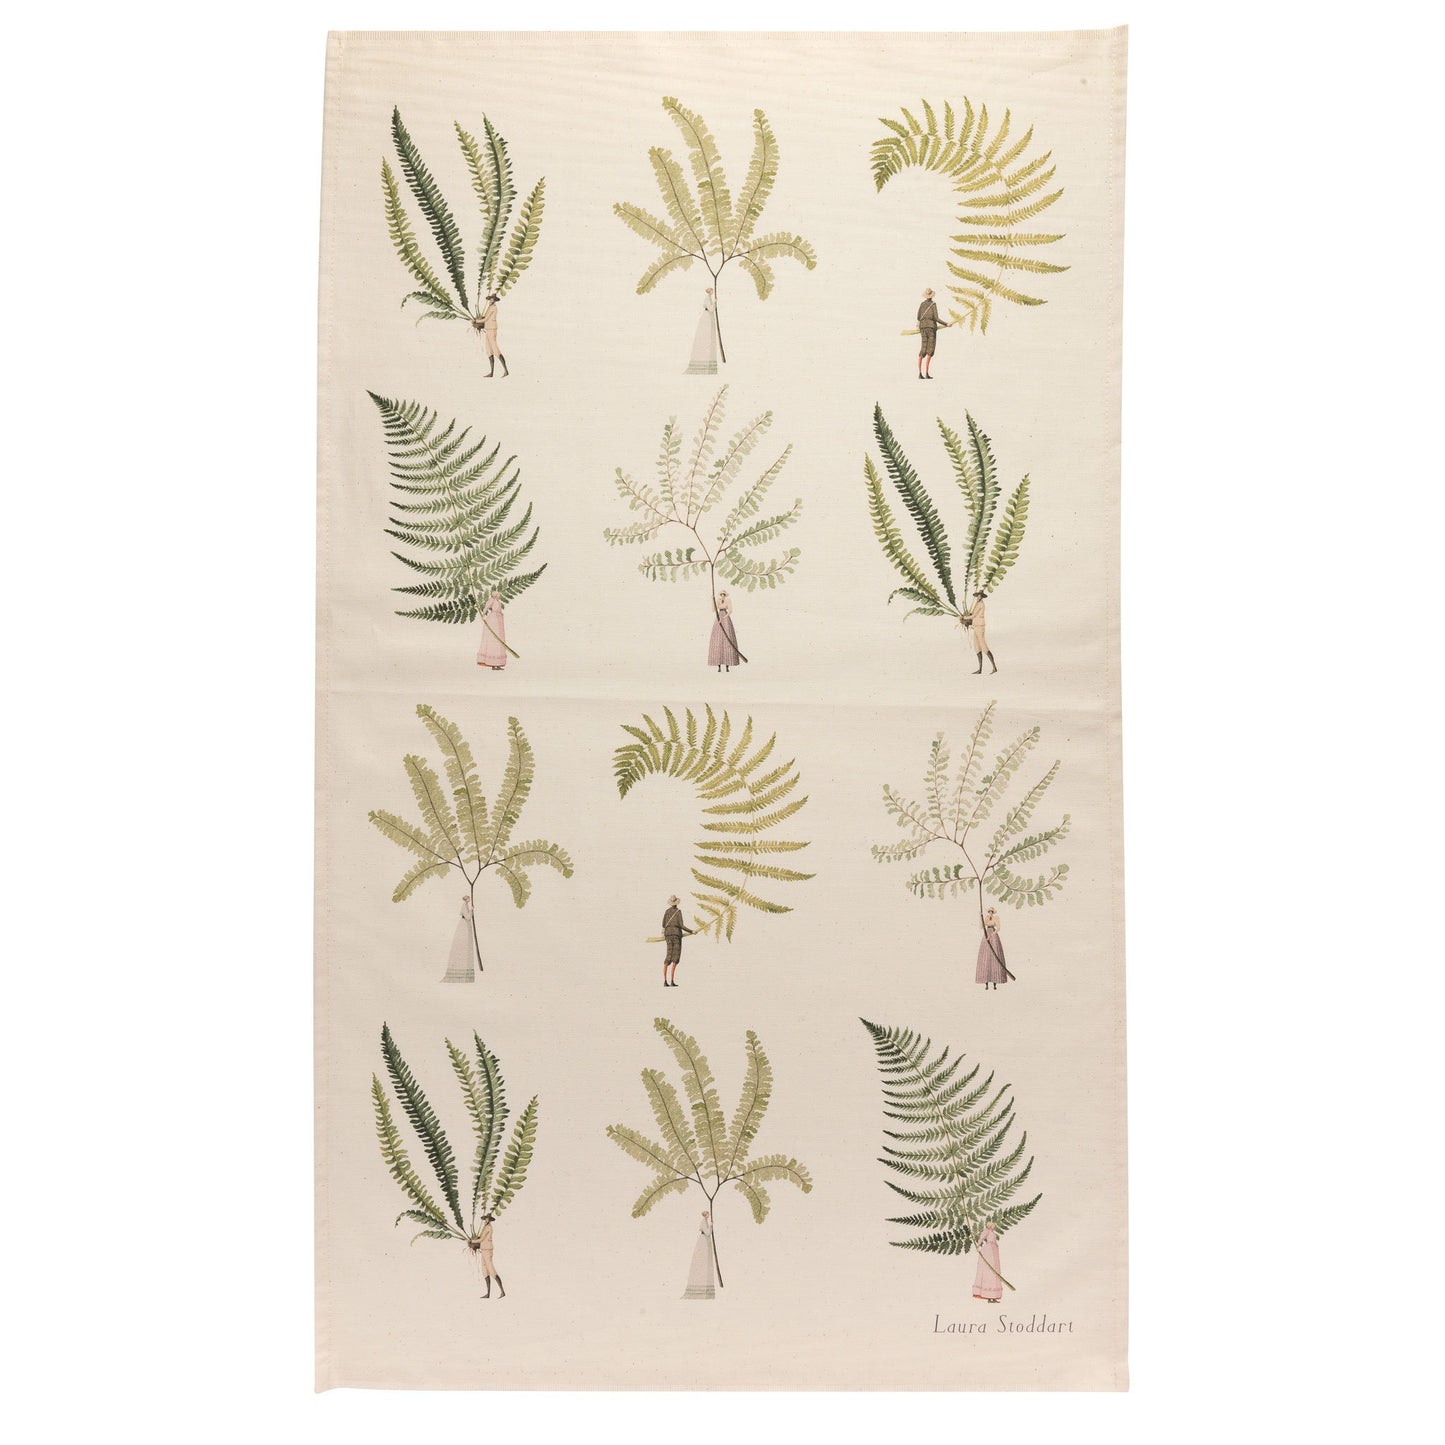 tea towel, natural cotton, 100% cotton, unbleached cotton, illustration, ferns, made in england